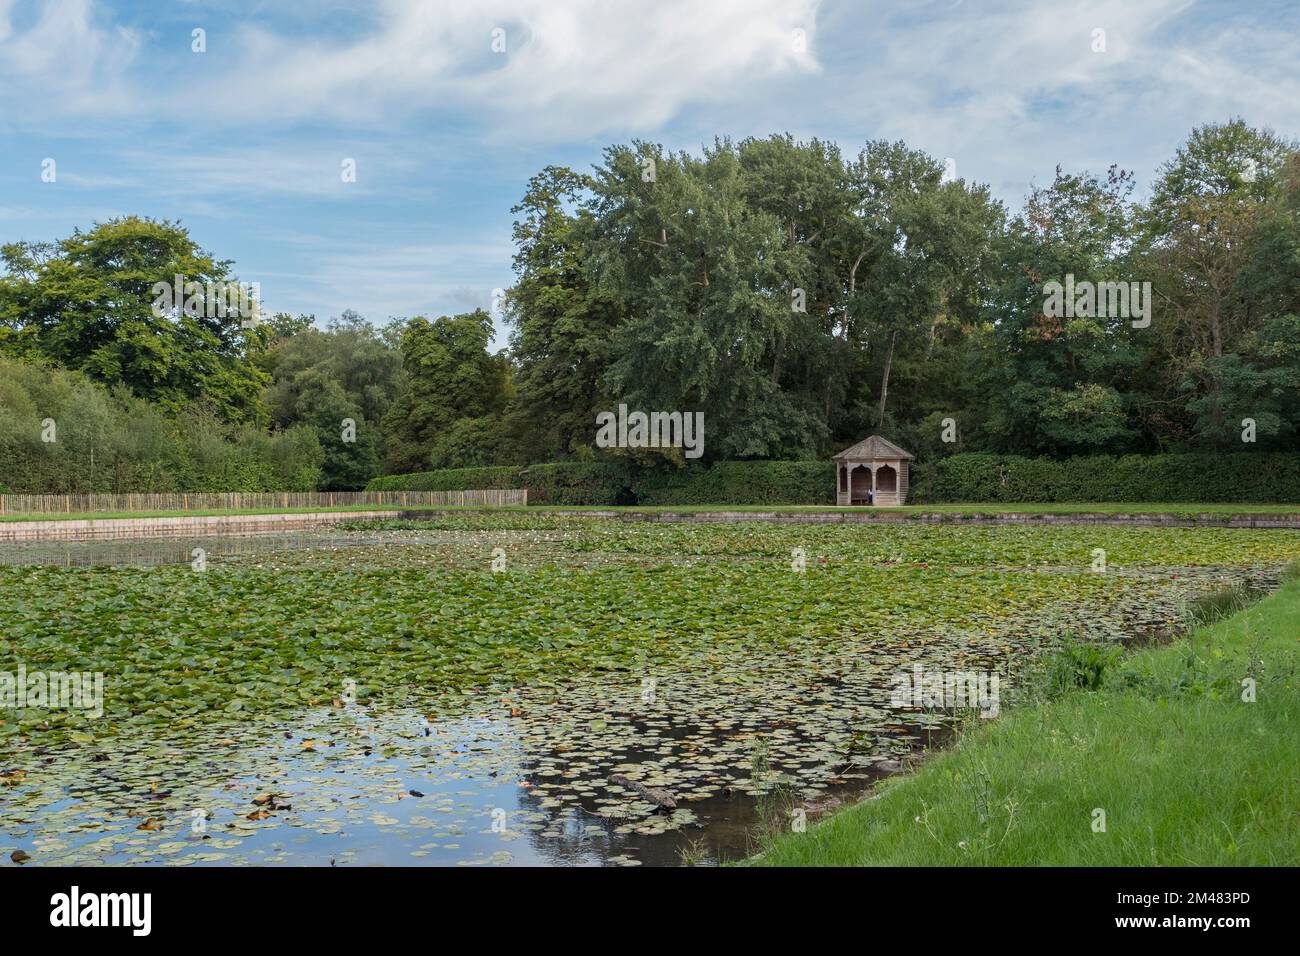 General view of Cow Pond, an ornamental lake gilded with an abundance of water lilies, Windsor Great Park, Surrey, UK. Stock Photo